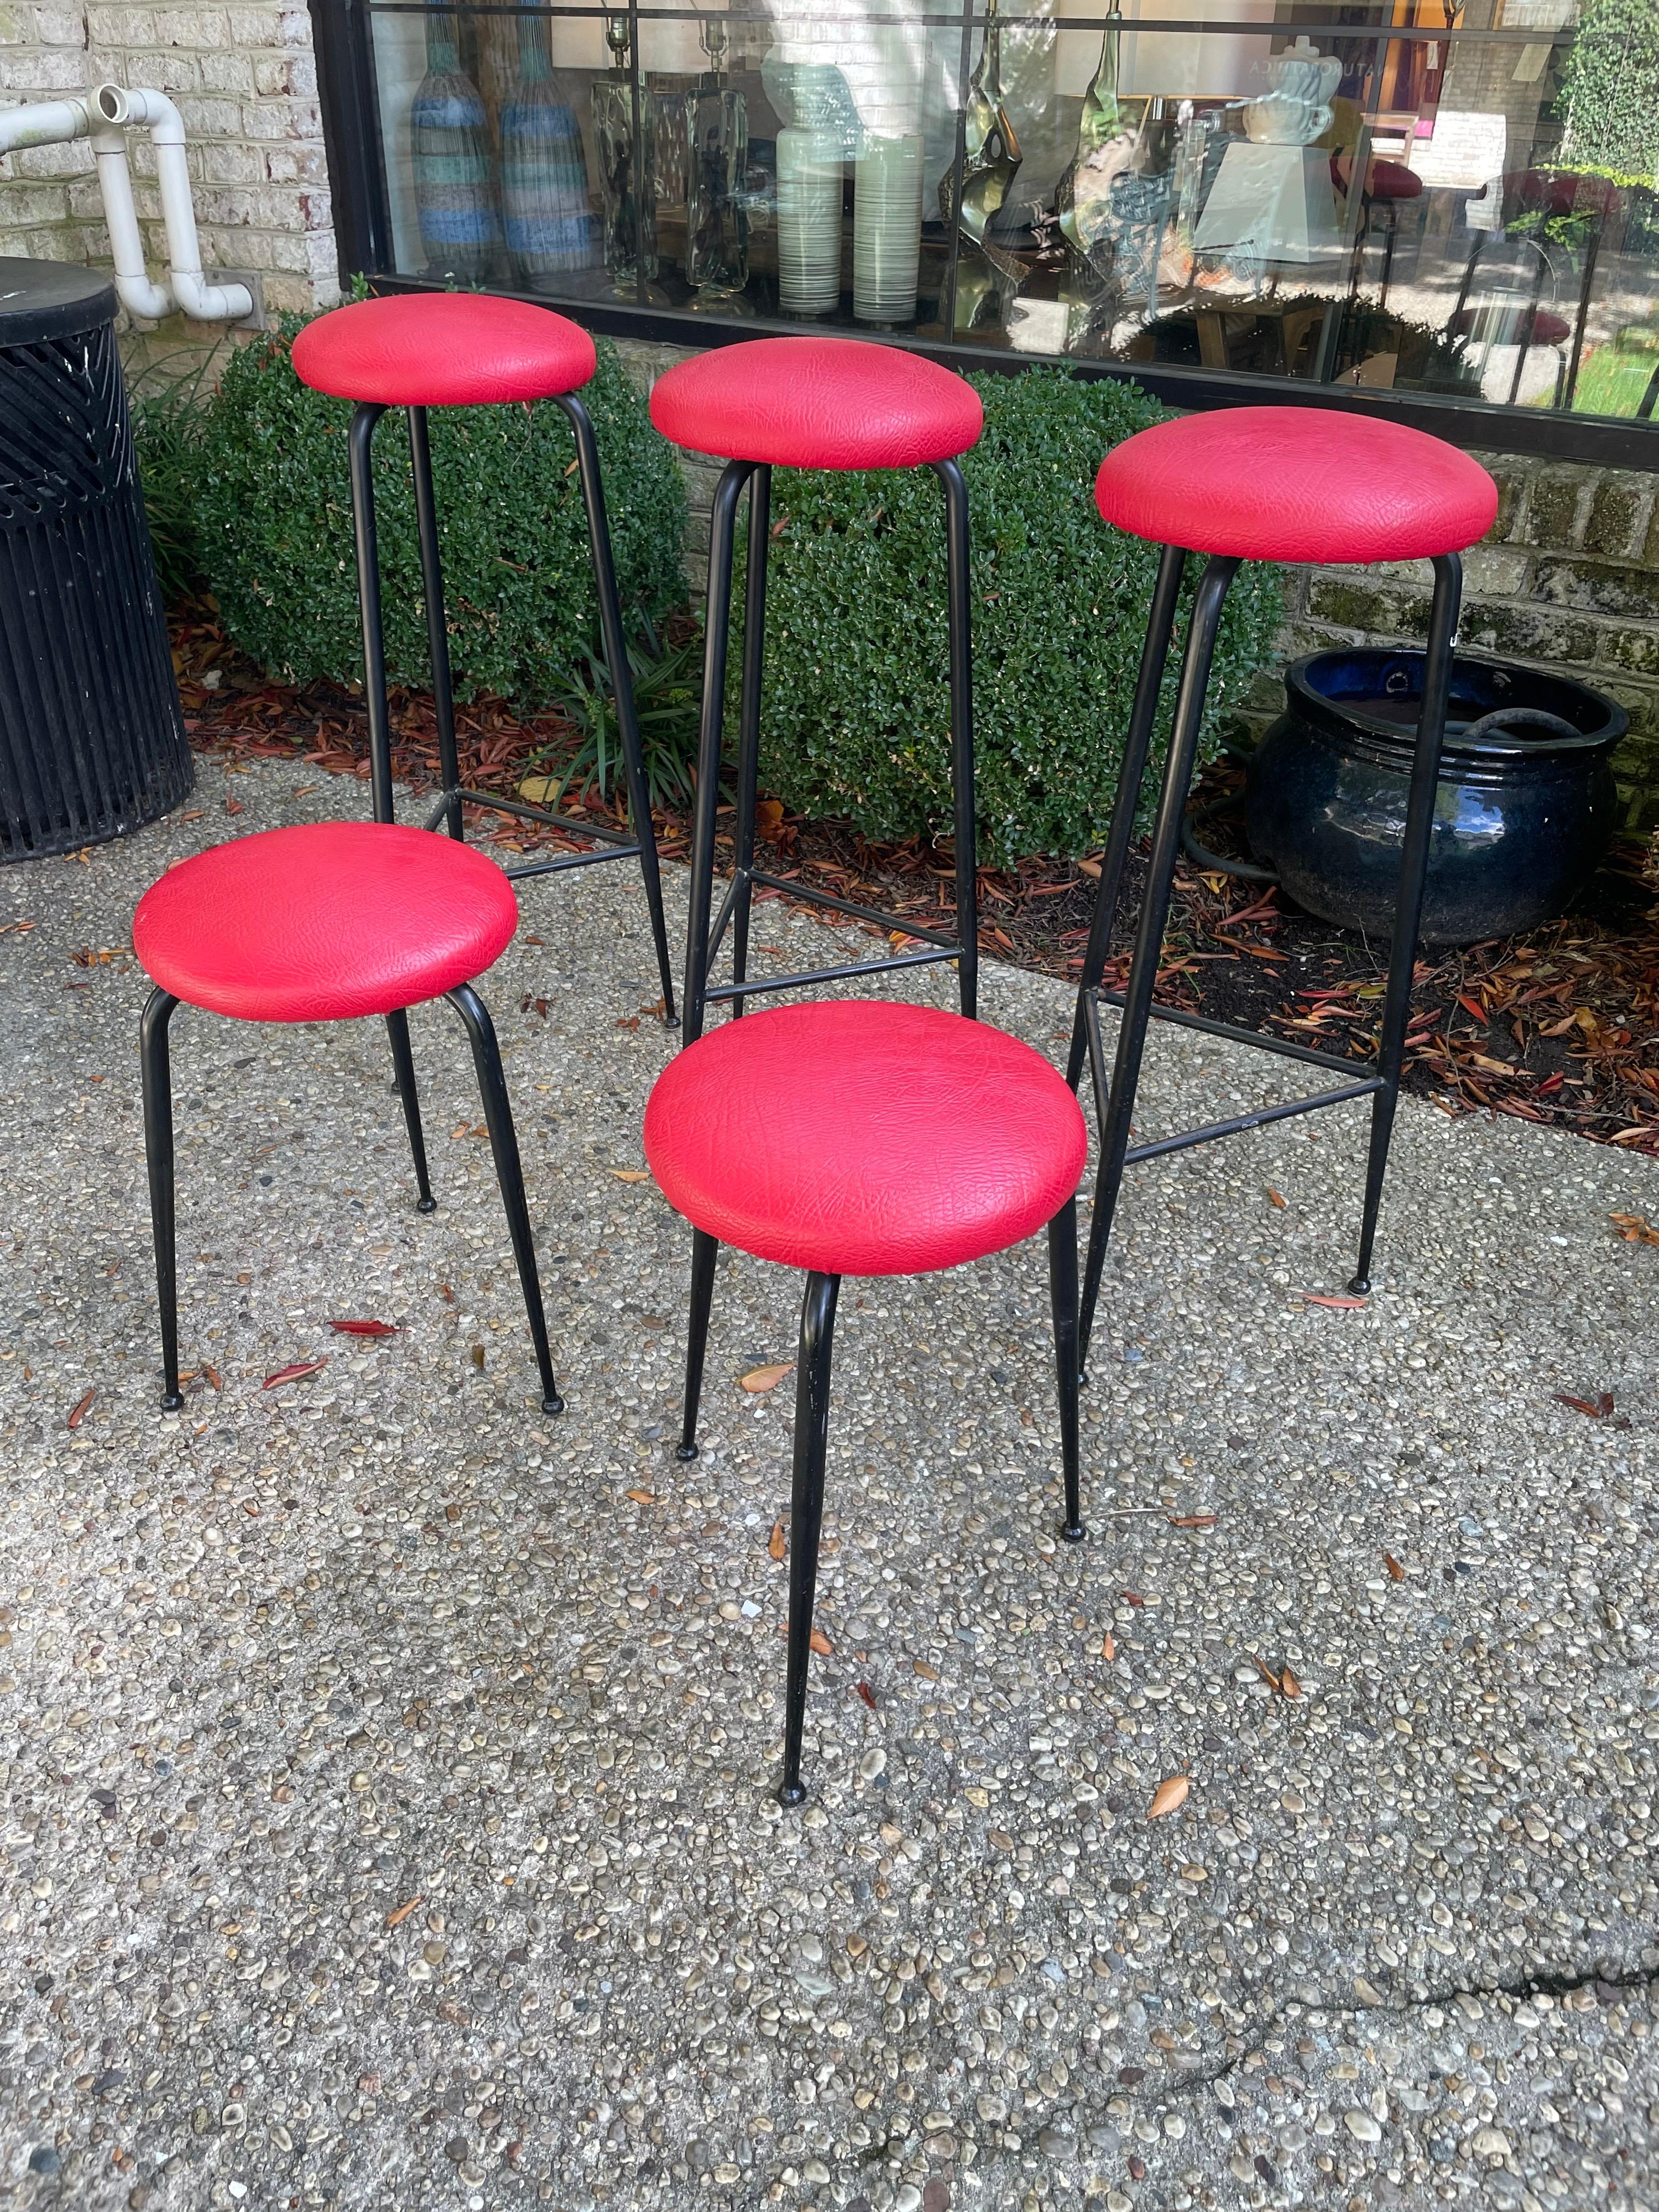 This is a vintage set of five stools in total, three (3) are bar height at 34